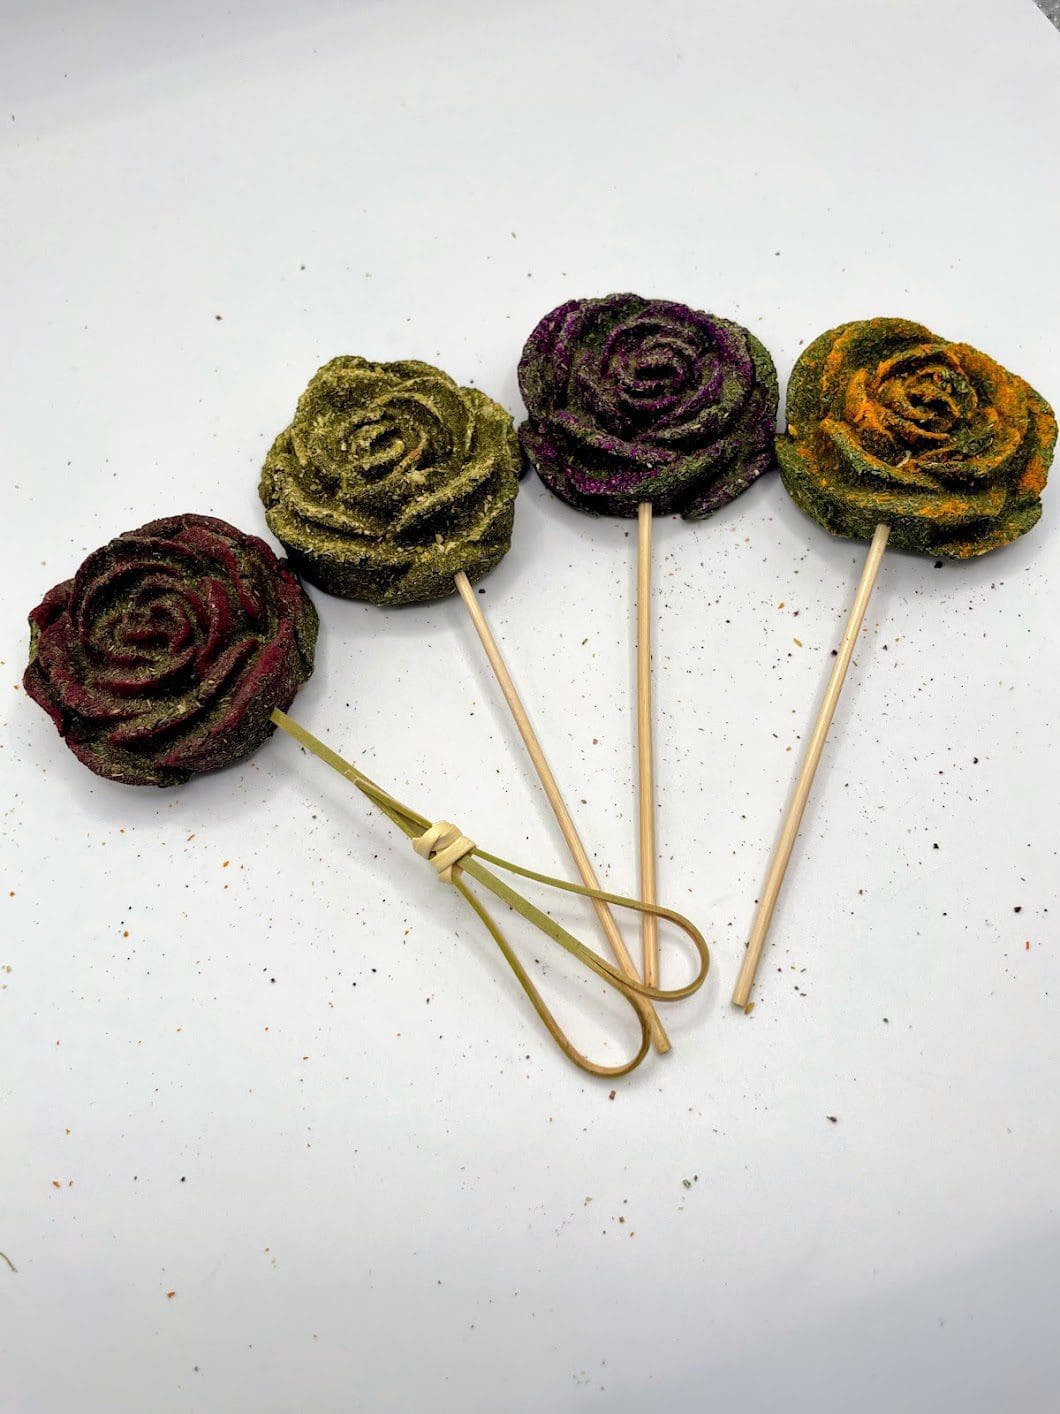 4 Pack Timothy Hay Rose Flower Lollipop with Bamboo Stick Treat for Rabbits, Hamsters, Guinea Pigs, Chinchillas and Small Rodents.